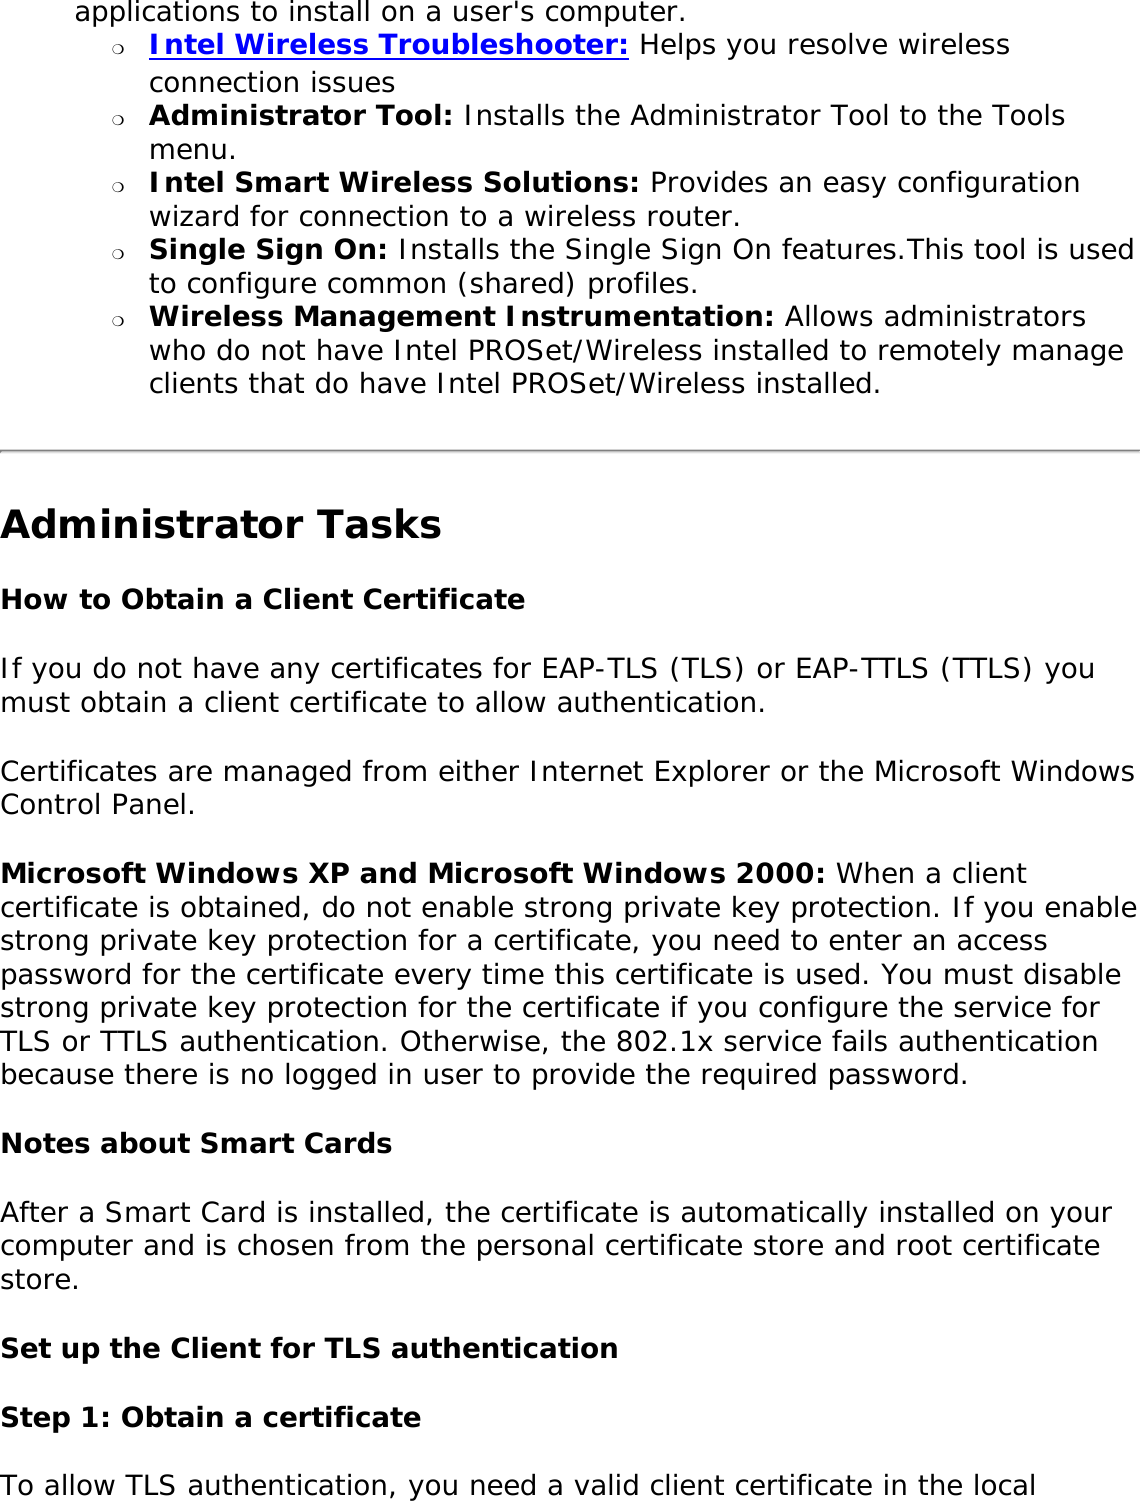 applications to install on a user&apos;s computer. ❍     Intel Wireless Troubleshooter: Helps you resolve wireless connection issues❍     Administrator Tool: Installs the Administrator Tool to the Tools menu.❍     Intel Smart Wireless Solutions: Provides an easy configuration wizard for connection to a wireless router.❍     Single Sign On: Installs the Single Sign On features.This tool is used to configure common (shared) profiles. ❍     Wireless Management Instrumentation: Allows administrators who do not have Intel PROSet/Wireless installed to remotely manage clients that do have Intel PROSet/Wireless installed.Administrator TasksHow to Obtain a Client CertificateIf you do not have any certificates for EAP-TLS (TLS) or EAP-TTLS (TTLS) you must obtain a client certificate to allow authentication. Certificates are managed from either Internet Explorer or the Microsoft Windows Control Panel. Microsoft Windows XP and Microsoft Windows 2000: When a client certificate is obtained, do not enable strong private key protection. If you enable strong private key protection for a certificate, you need to enter an access password for the certificate every time this certificate is used. You must disable strong private key protection for the certificate if you configure the service for TLS or TTLS authentication. Otherwise, the 802.1x service fails authentication because there is no logged in user to provide the required password. Notes about Smart Cards After a Smart Card is installed, the certificate is automatically installed on your computer and is chosen from the personal certificate store and root certificate store. Set up the Client for TLS authenticationStep 1: Obtain a certificate To allow TLS authentication, you need a valid client certificate in the local 